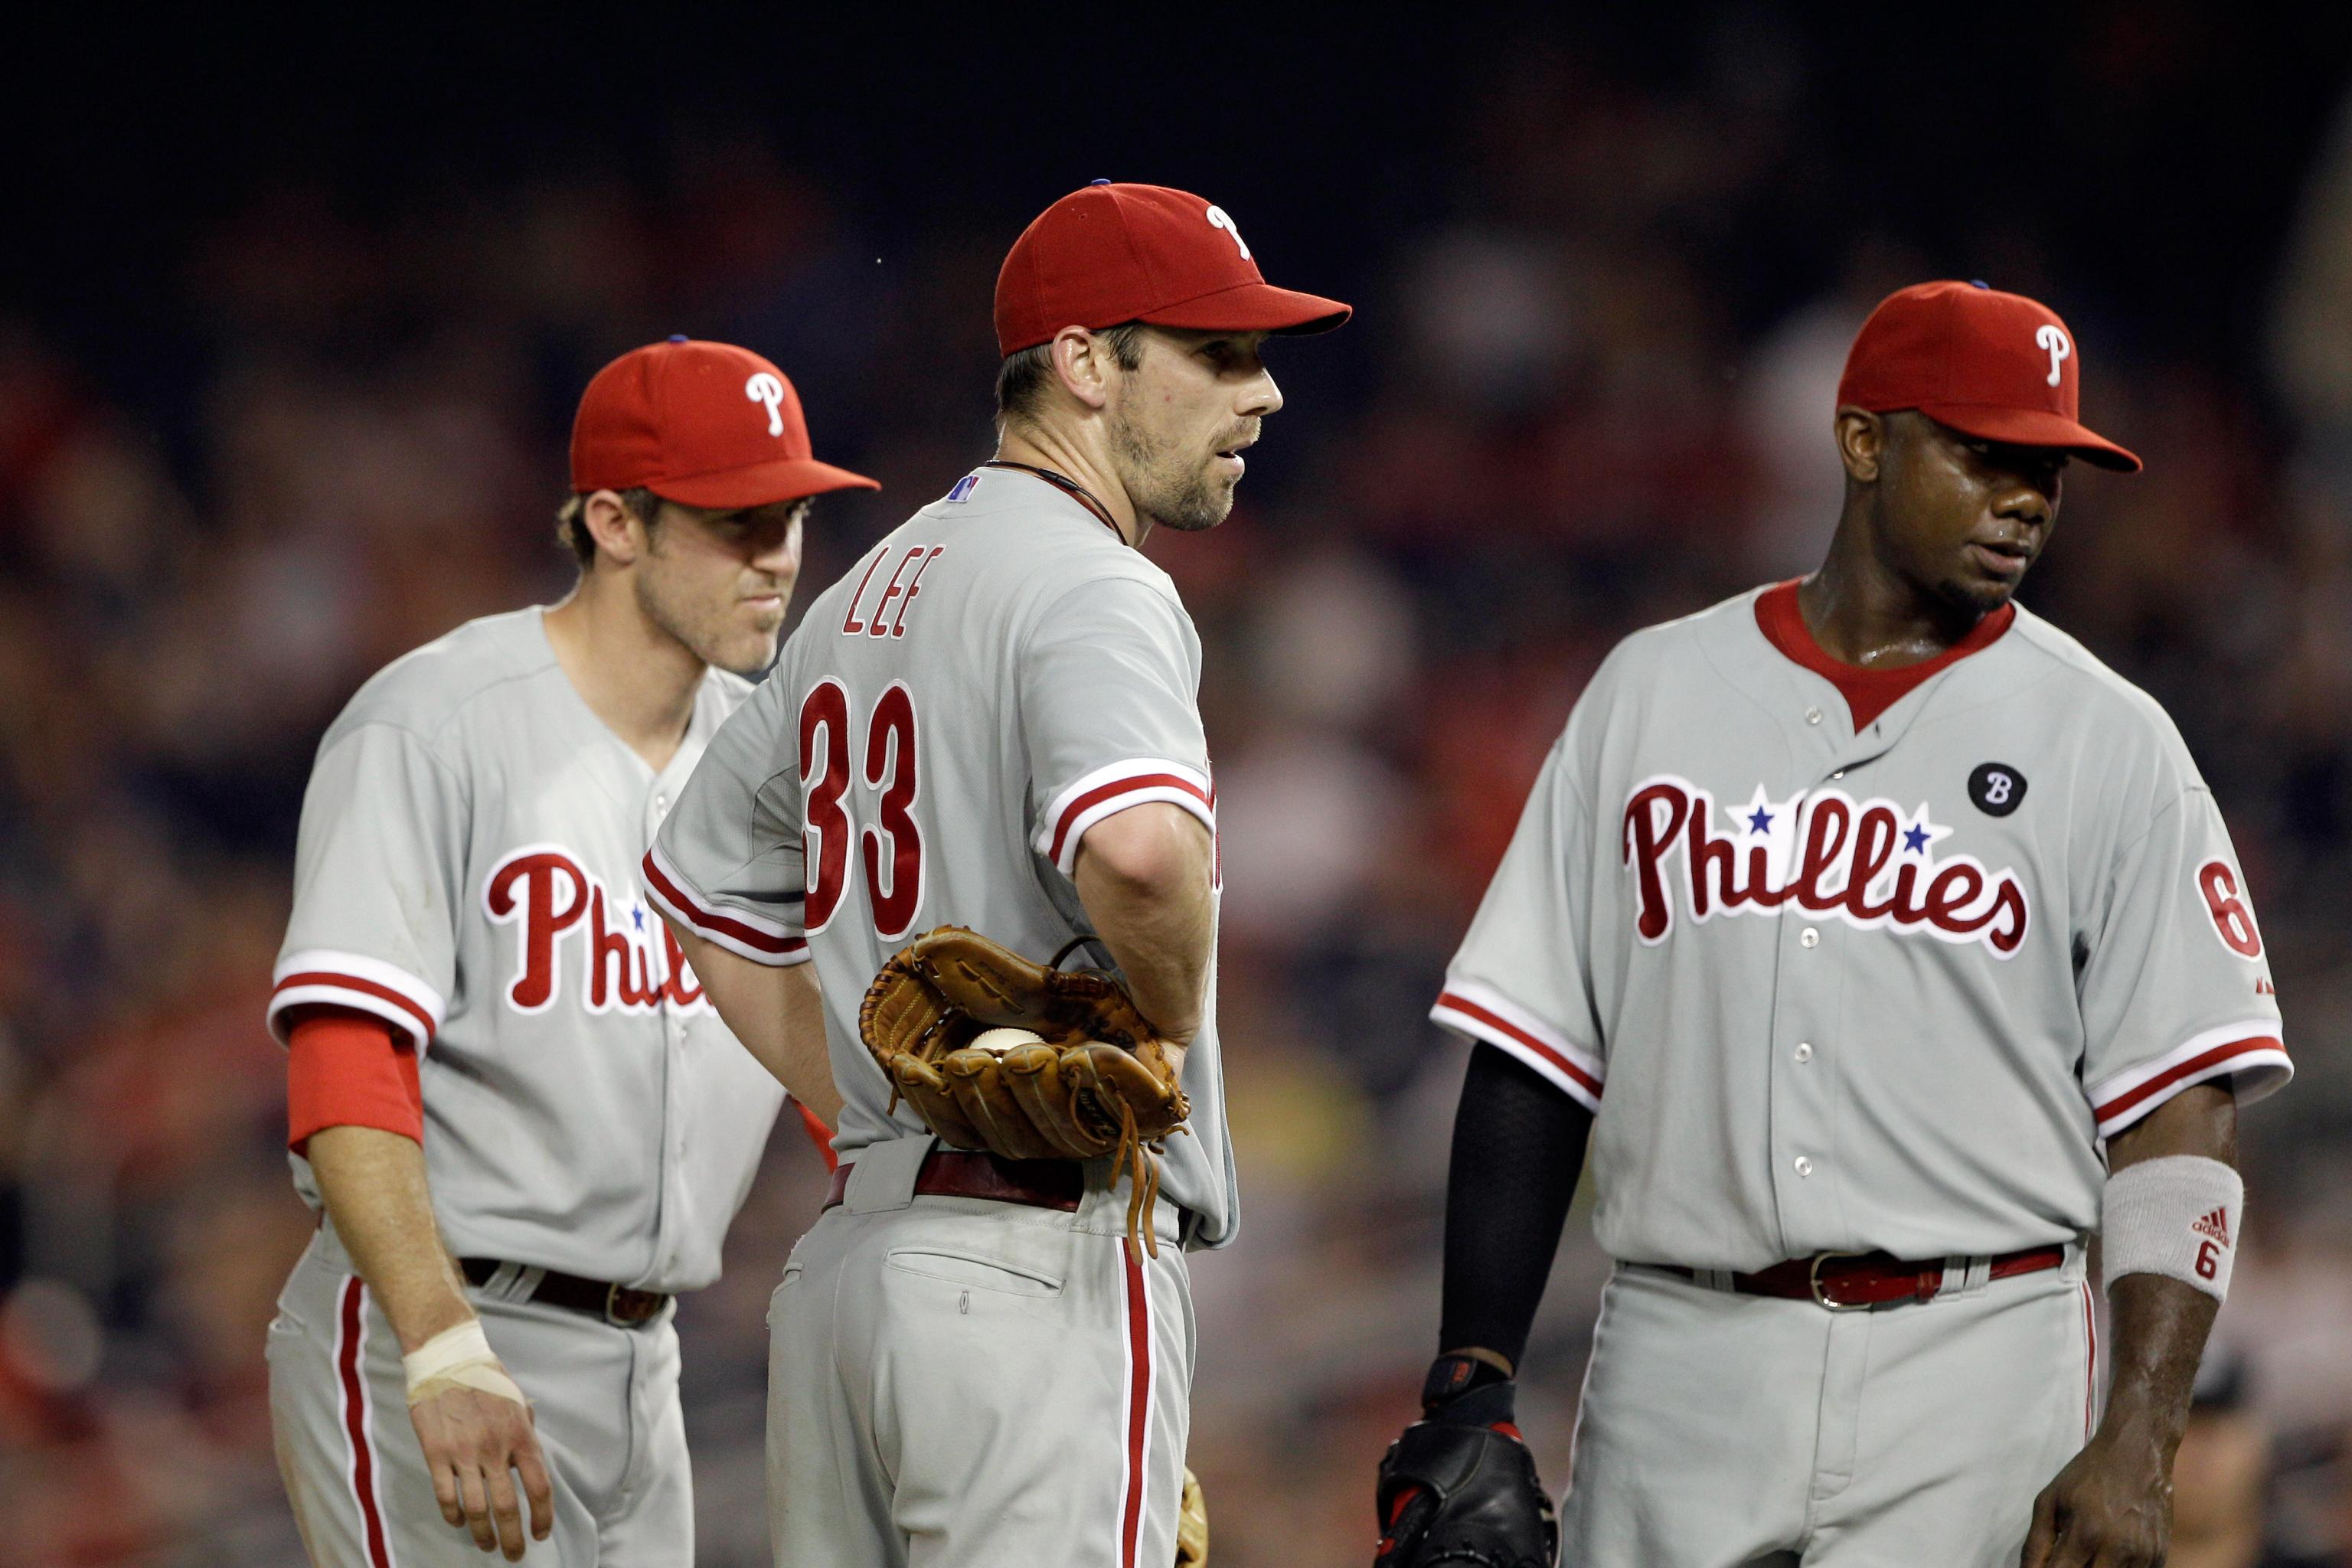 Baseball trade madness: The Phillies are buyers